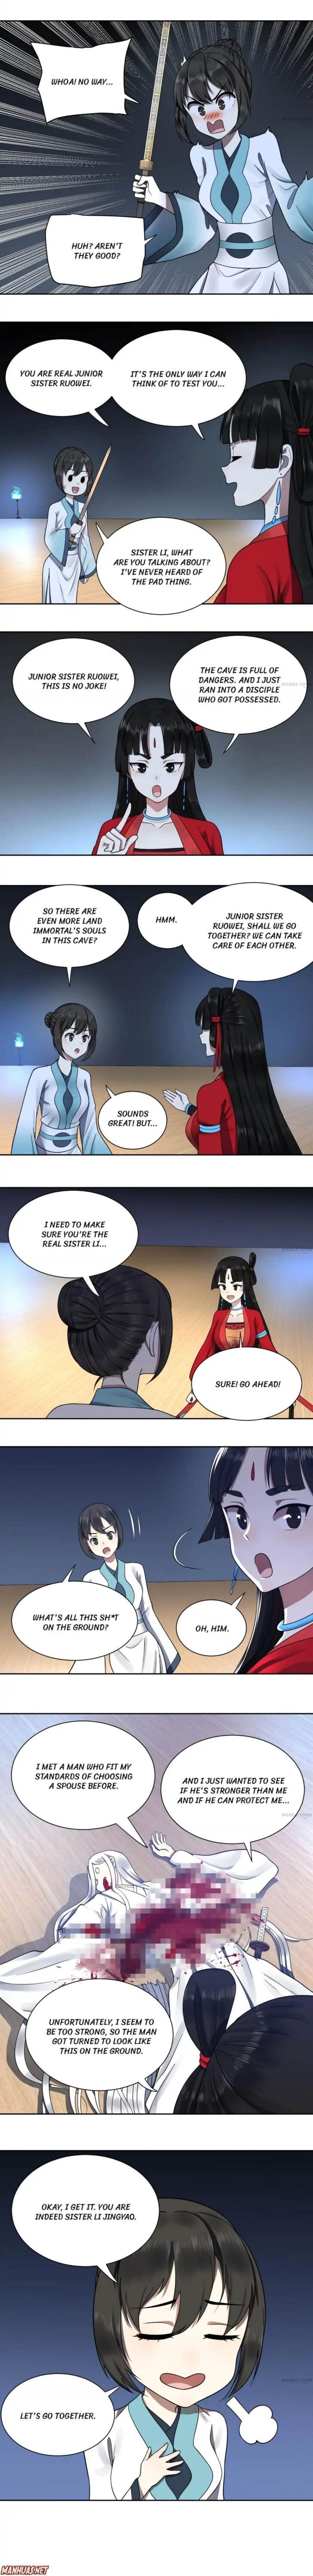 My Three Thousand Years to the Sky Chapter 081 page 3